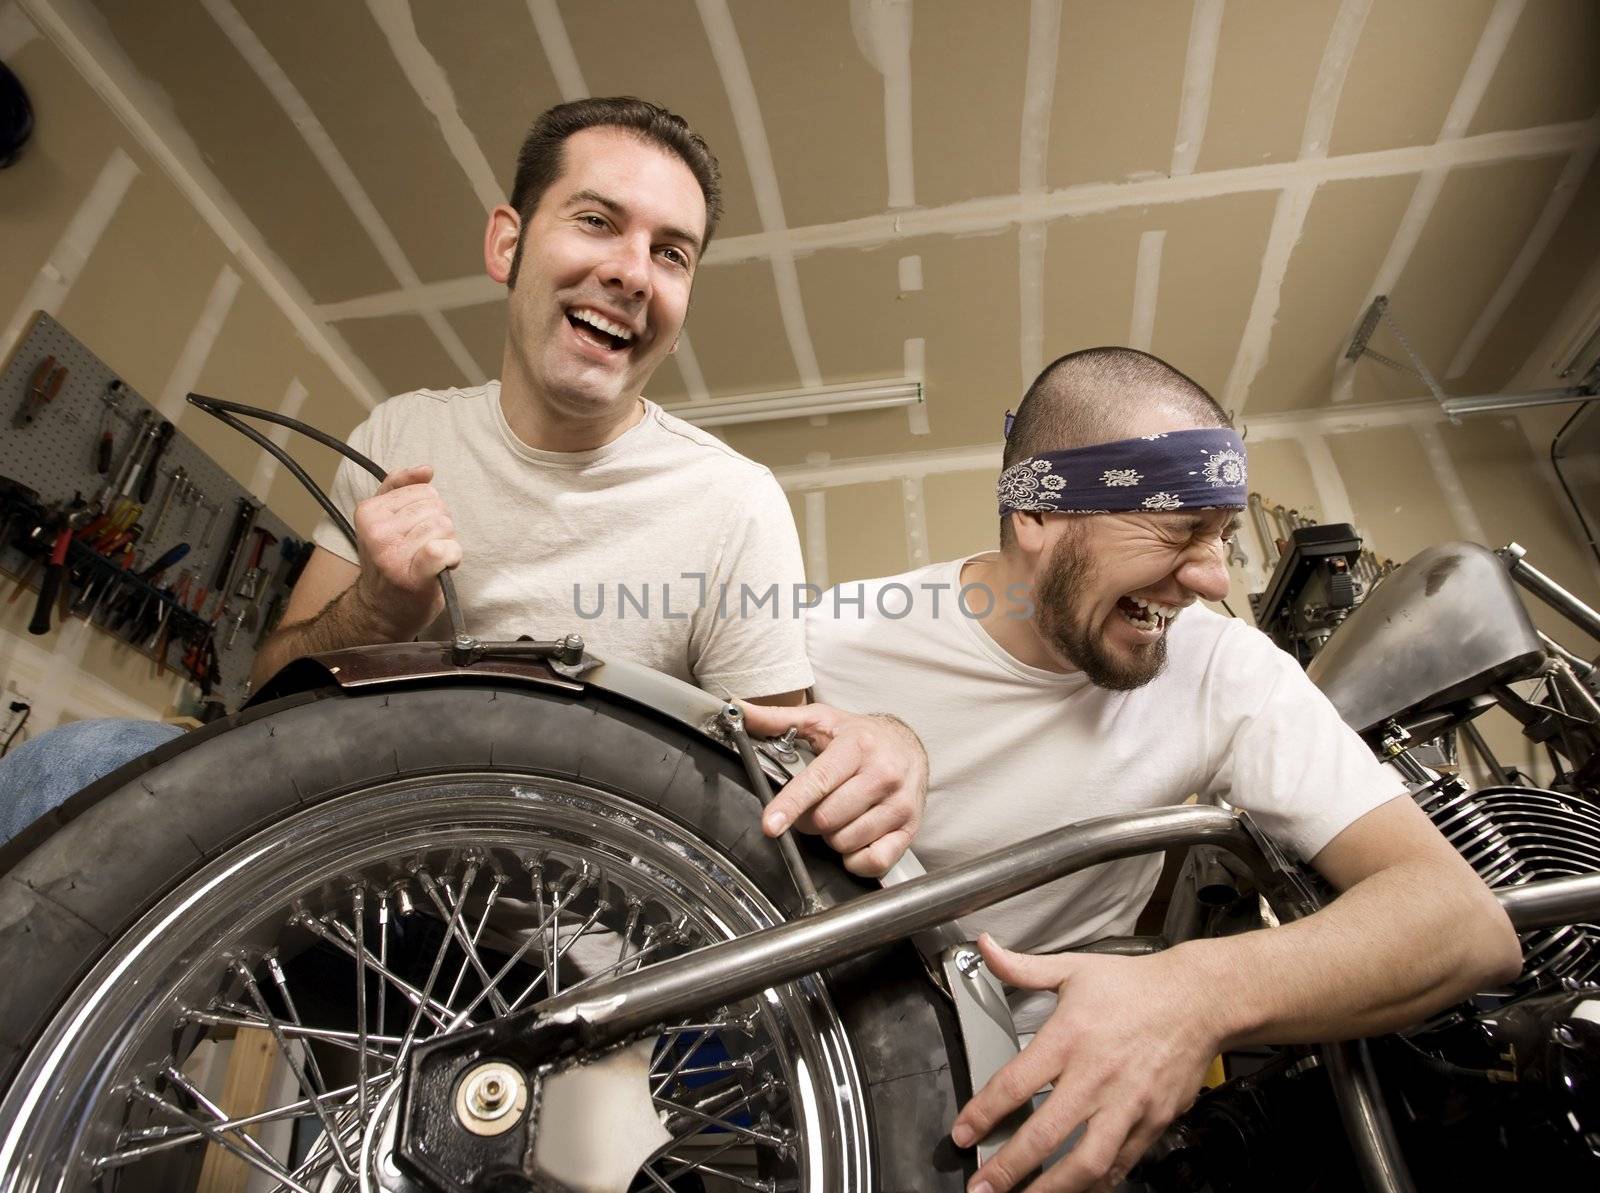 Two laughing men working on a chopper-style motorcycle